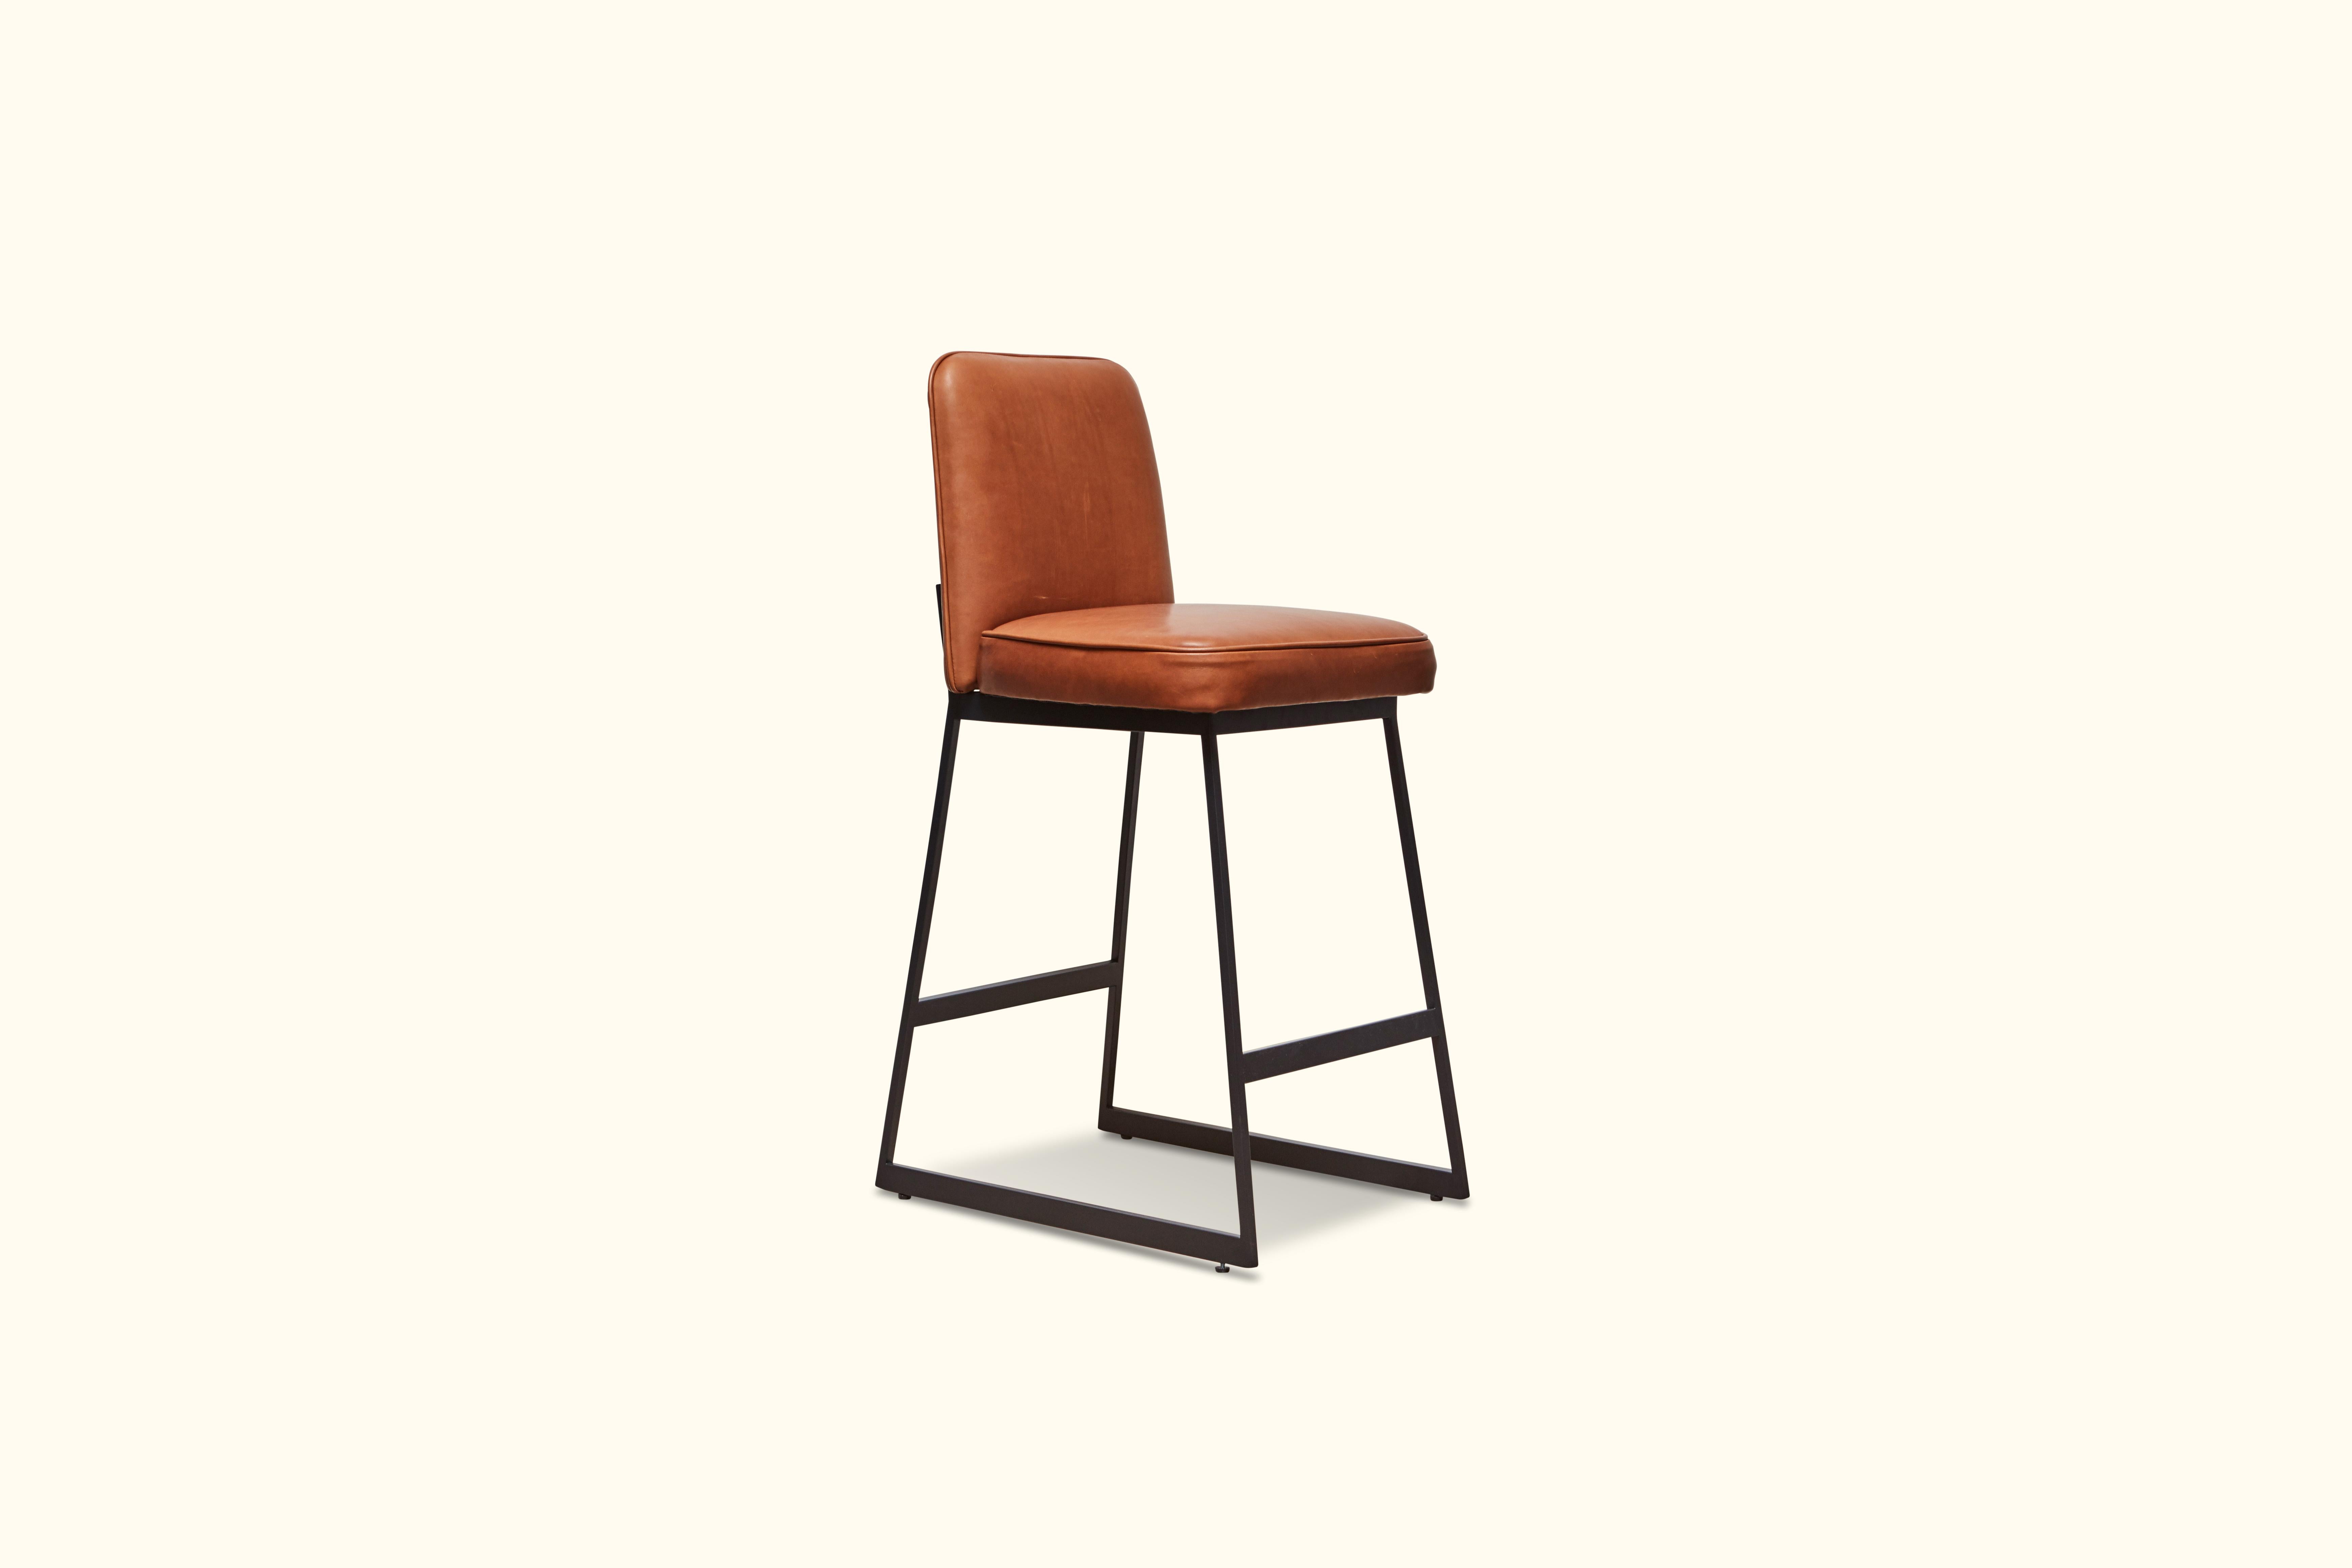 The Elysian barstool is a modern take on the classic stool. Shown here in matte black powdercoat.

Available to order in customer's own materials.

As shown: $1,502
To order: $1,250 + COM.